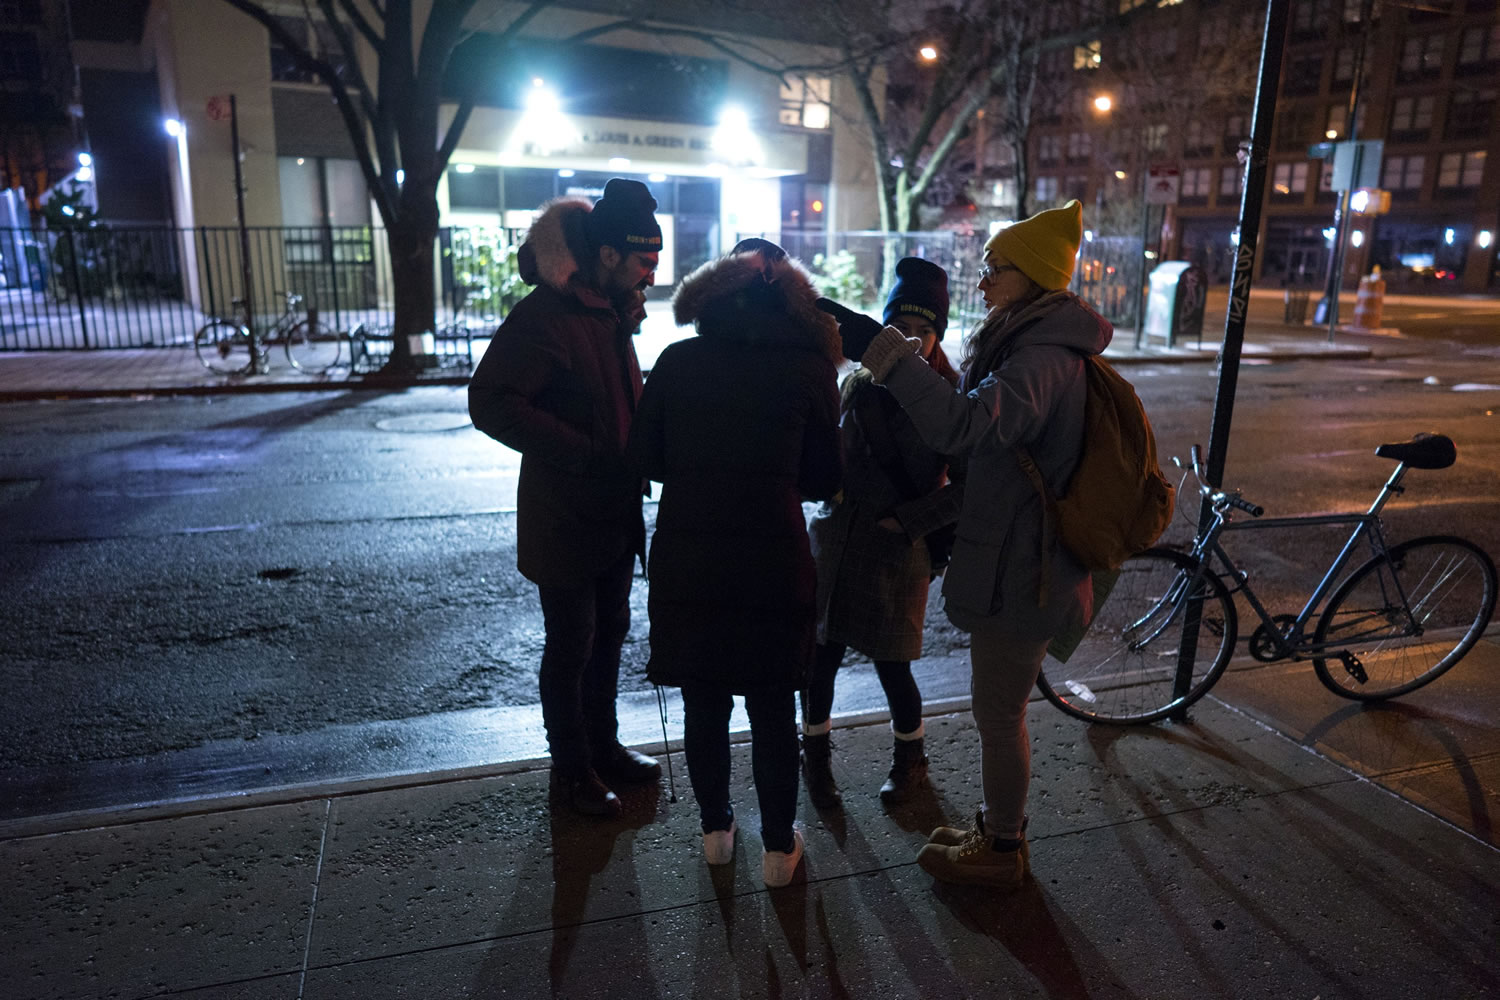 From left, Edward Casabian, Victoria Parker, Alexis Sypek and Ashley Treni, all from New York and working with The Robin Hood Foundation, an organization that helps the poor, plan their route as they take part in a count and survey of homeless persons on the streets of New York early Tuesday. Hundreds of people fanned out across the city to conduct the survey just after midnight.